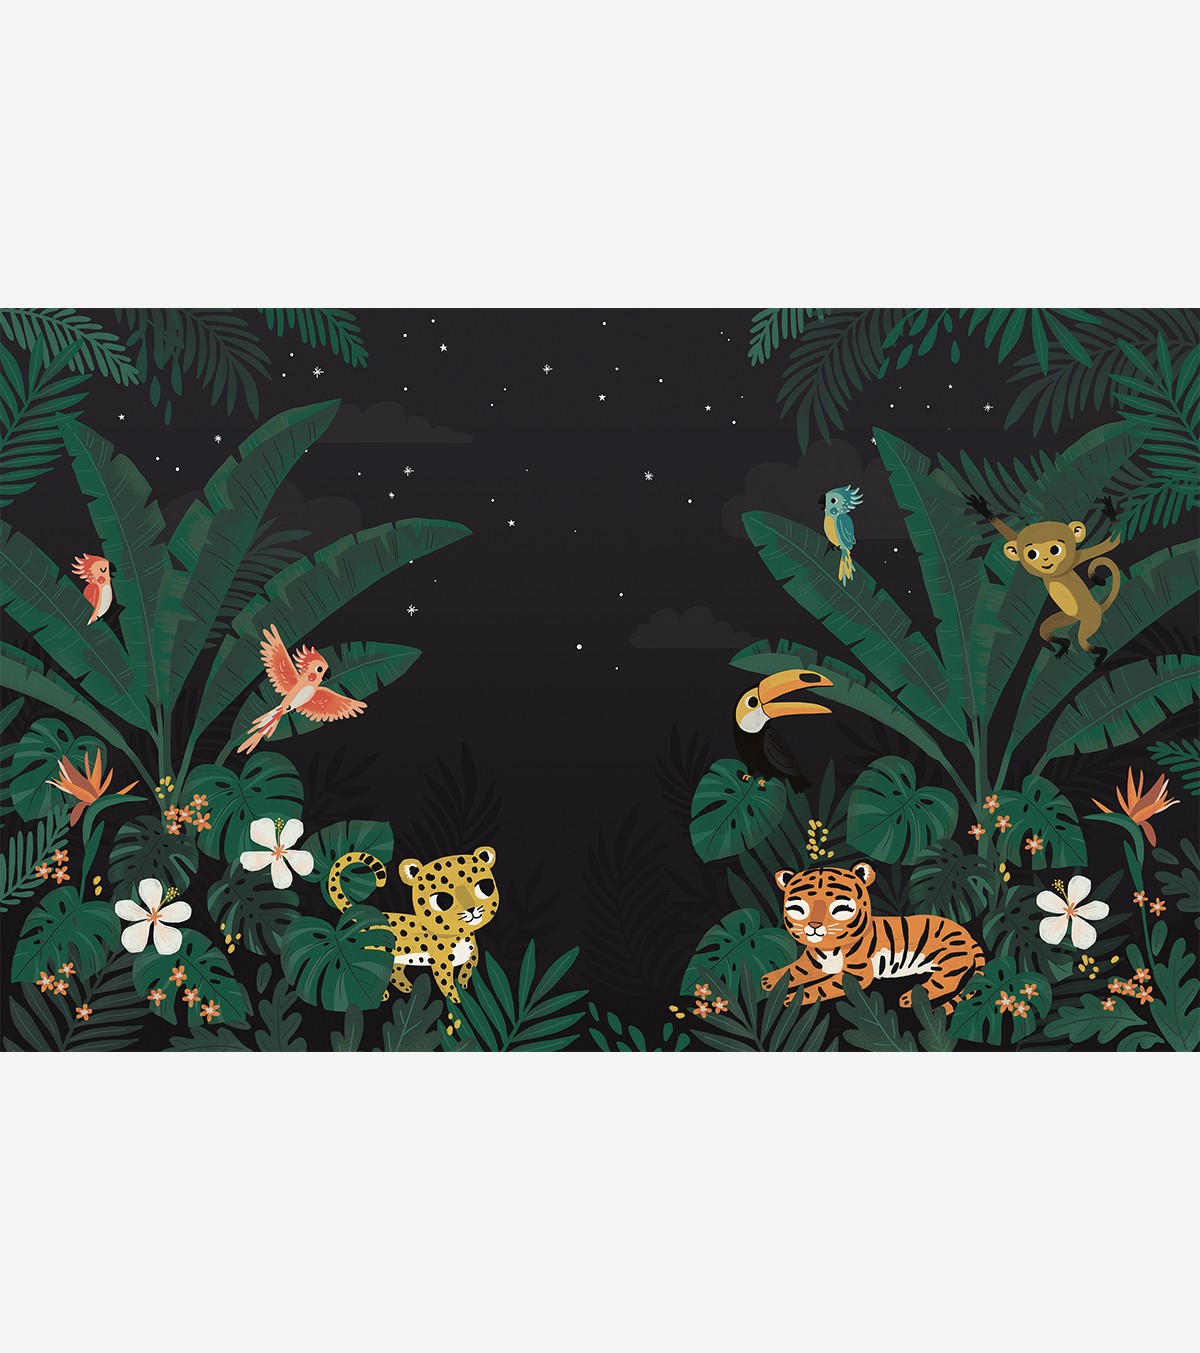 JUNGLE NIGHT - Panorama-Tapete - Tiere des Dschungels